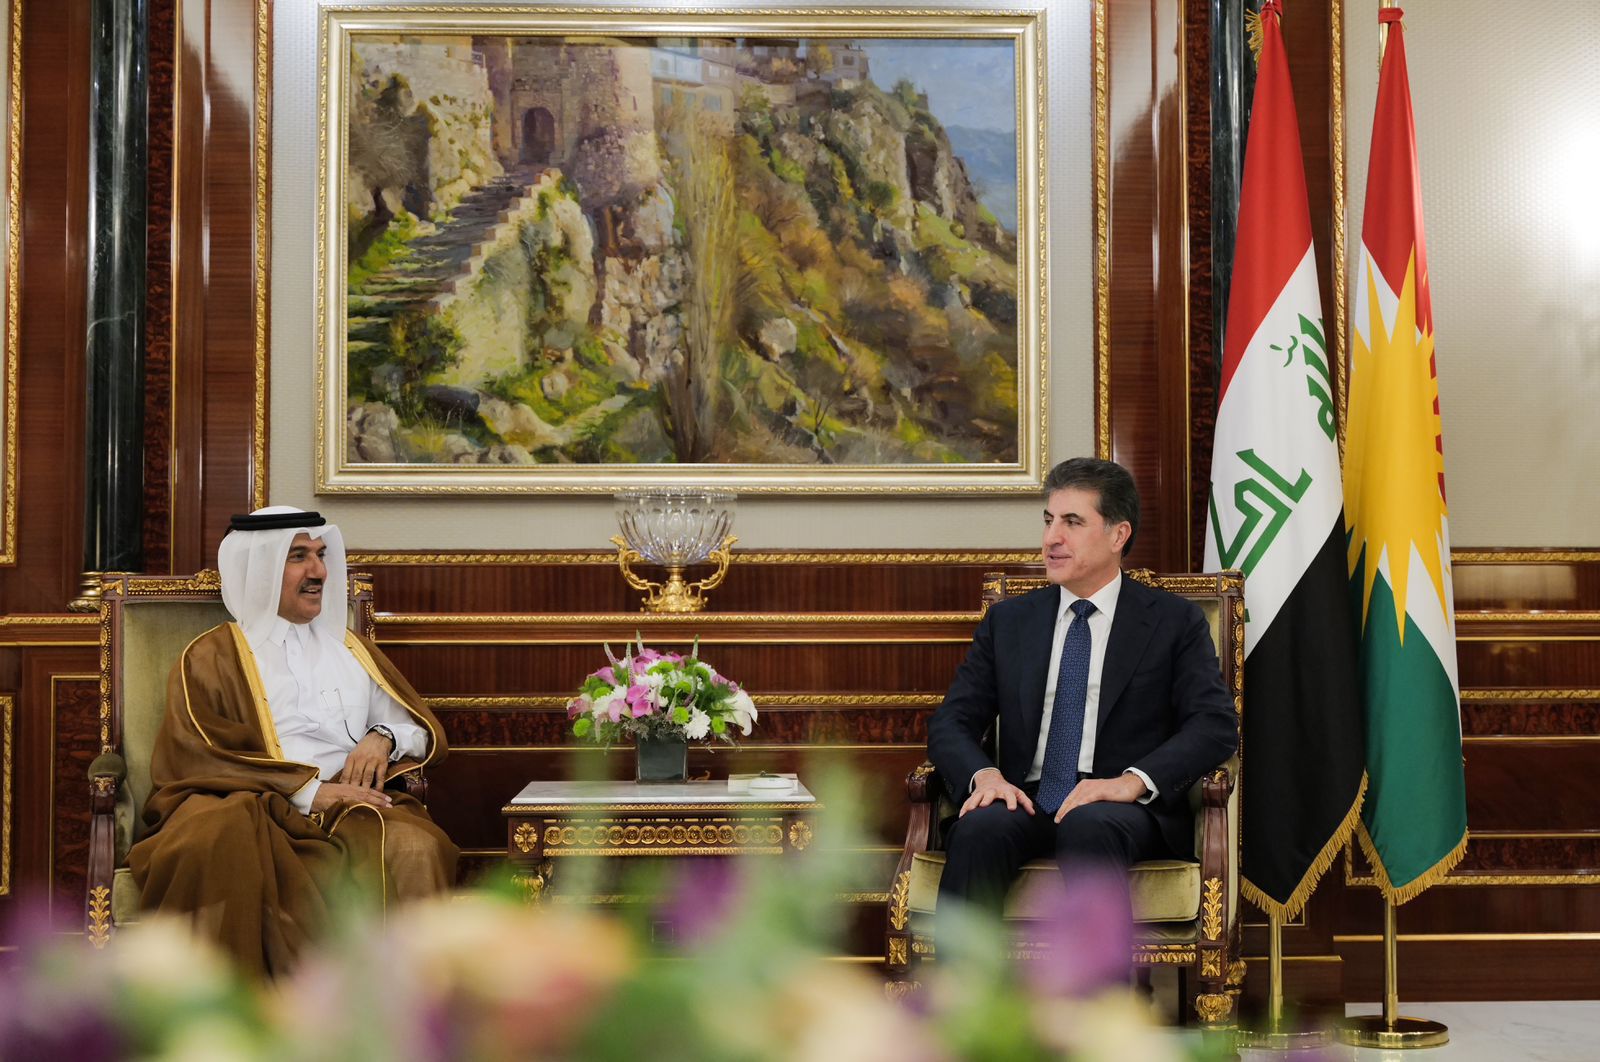 Nechirvan Barzani: The environment is suitable for Qatari investment in Iraq and the region